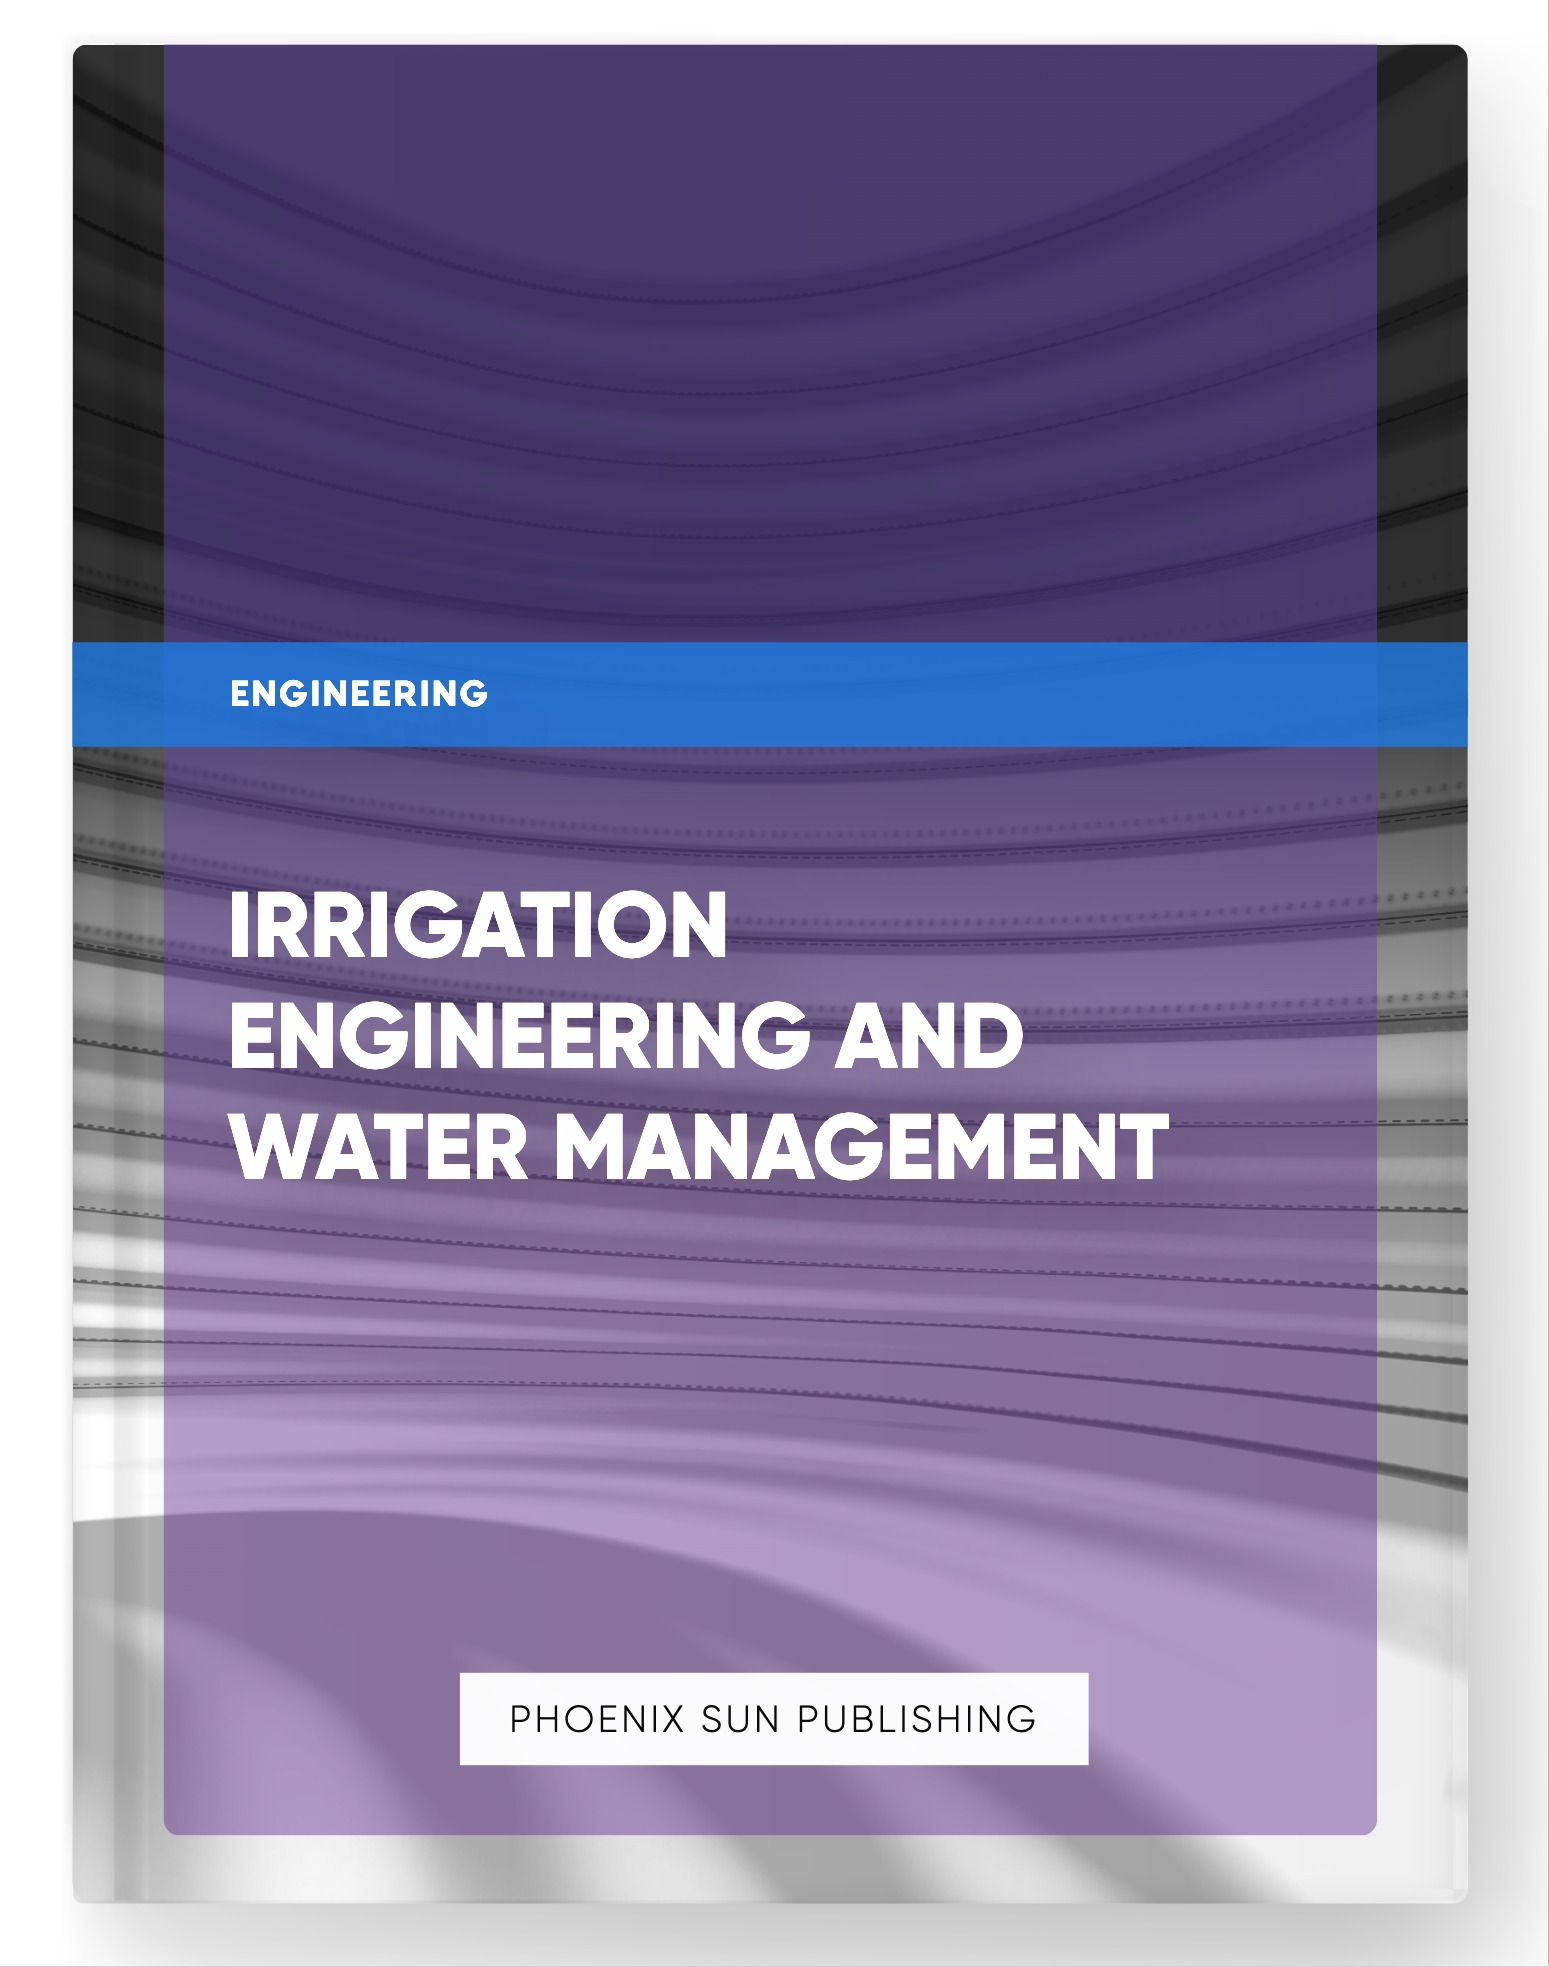 Irrigation Engineering and Water Management